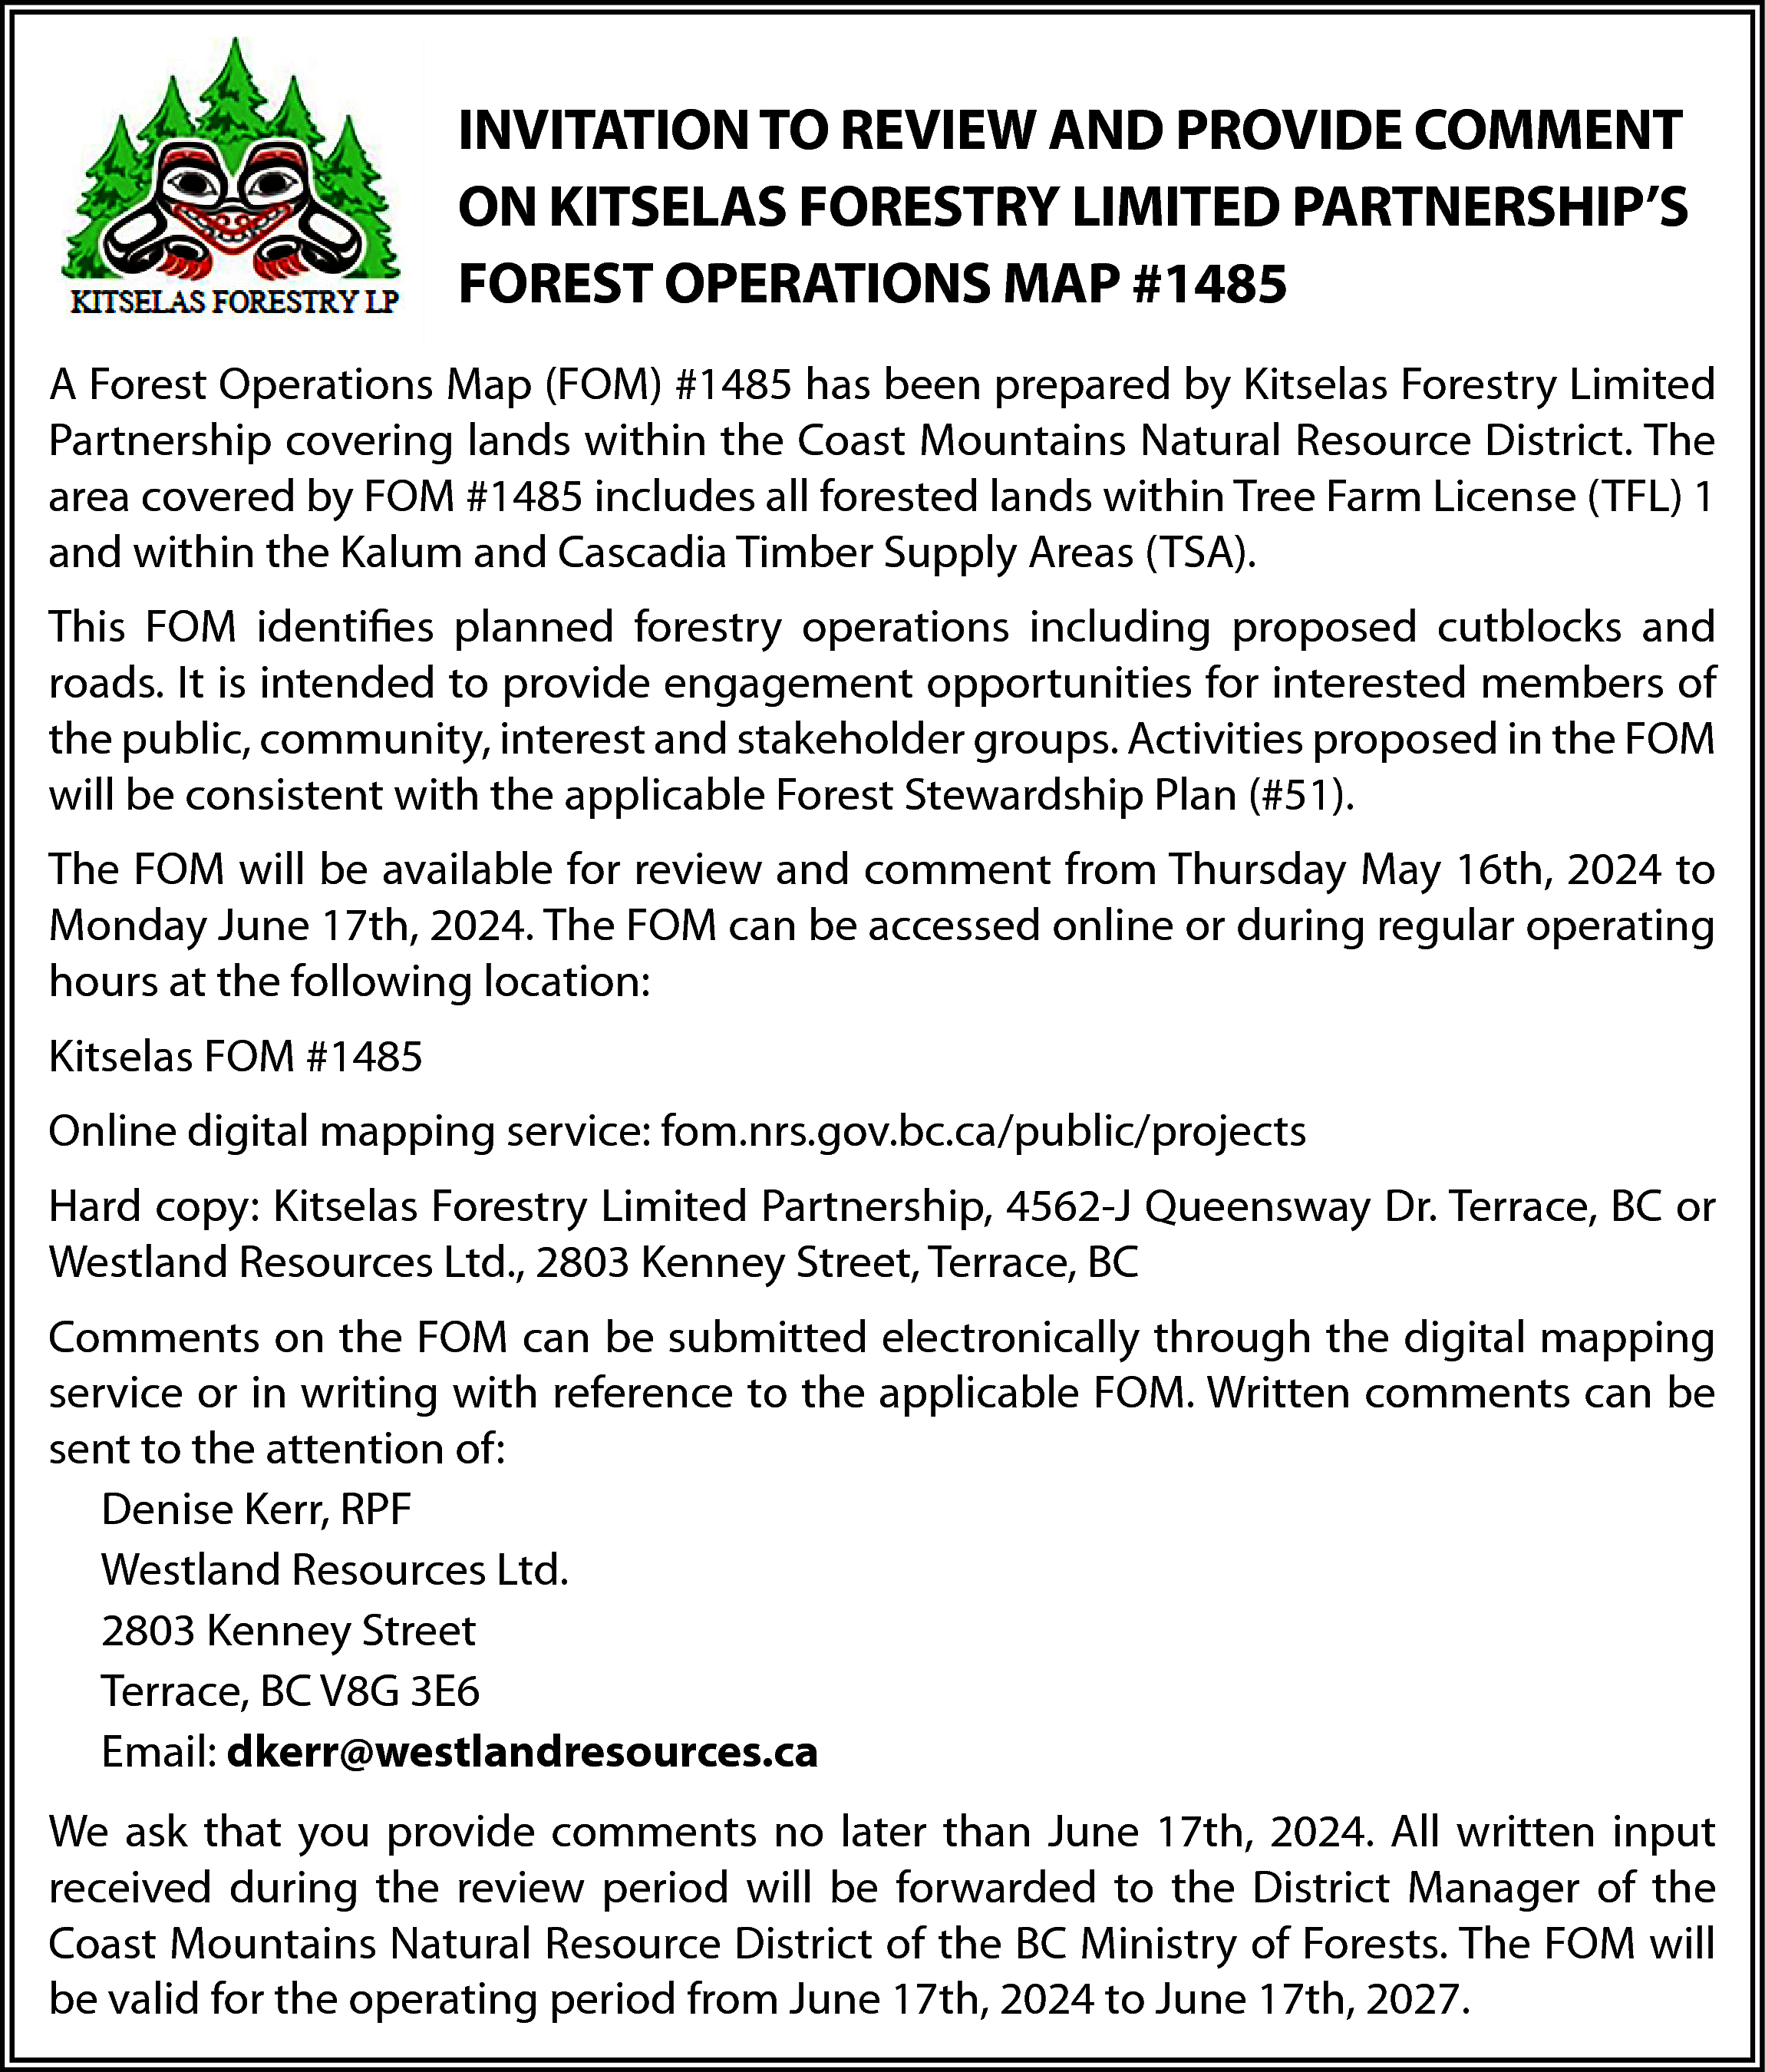 INVITATION TO REVIEW AND PROVIDE  INVITATION TO REVIEW AND PROVIDE COMMENT  ON KITSELAS FORESTRY LIMITED PARTNERSHIP’S  FOREST OPERATIONS MAP #1485  A Forest Operations Map (FOM) #1485 has been prepared by Kitselas Forestry Limited  Partnership covering lands within the Coast Mountains Natural Resource District. The  area covered by FOM #1485 includes all forested lands within Tree Farm License (TFL) 1  and within the Kalum and Cascadia Timber Supply Areas (TSA).  This FOM identifies planned forestry operations including proposed cutblocks and  roads. It is intended to provide engagement opportunities for interested members of  the public, community, interest and stakeholder groups. Activities proposed in the FOM  will be consistent with the applicable Forest Stewardship Plan (#51).  The FOM will be available for review and comment from Thursday May 16th, 2024 to  Monday June 17th, 2024. The FOM can be accessed online or during regular operating  hours at the following location:  Kitselas FOM #1485  Online digital mapping service: fom.nrs.gov.bc.ca/public/projects  Hard copy: Kitselas Forestry Limited Partnership, 4562-J Queensway Dr. Terrace, BC or  Westland Resources Ltd., 2803 Kenney Street, Terrace, BC  Comments on the FOM can be submitted electronically through the digital mapping  service or in writing with reference to the applicable FOM. Written comments can be  sent to the attention of:  Denise Kerr, RPF  Westland Resources Ltd.  2803 Kenney Street  Terrace, BC V8G 3E6  Email: dkerr@westlandresources.ca  We ask that you provide comments no later than June 17th, 2024. All written input  received during the review period will be forwarded to the District Manager of the  Coast Mountains Natural Resource District of the BC Ministry of Forests. The FOM will  be valid for the operating period from June 17th, 2024 to June 17th, 2027.    